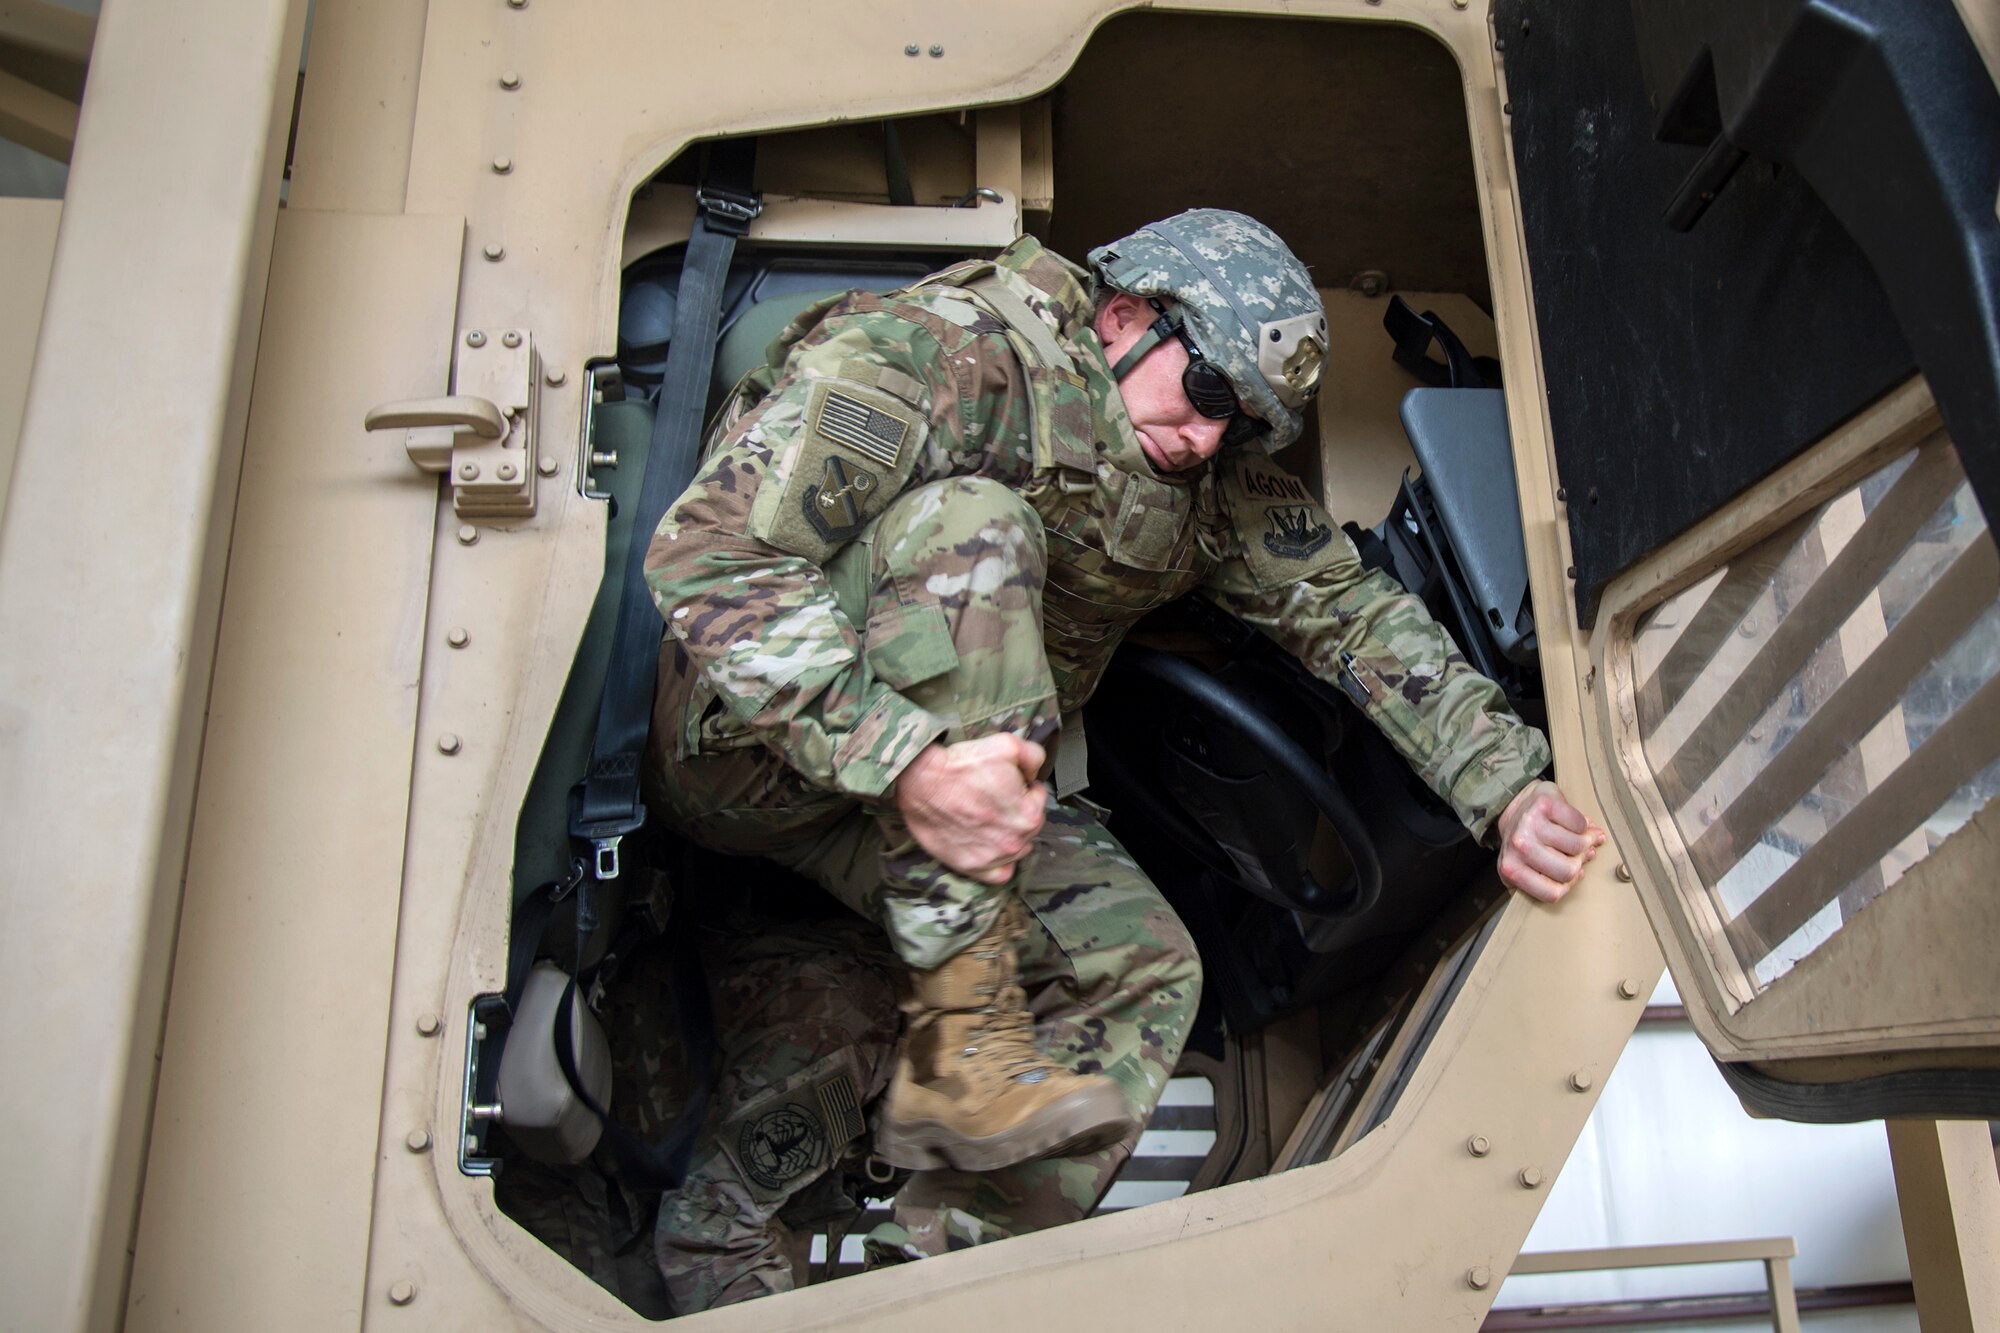 Col. Paul Birch, 93d Air Ground Operations Wing (AGOW) commander, steps out of a mine-resistant, ambush-protected vehicle roll-over simulator during an immersion tour, June 25, 2018, at Moody Air Force Base, Ga. Birch toured the 820th Base Defense Group to gain a better understanding of their overall mission, duties and comprehensive capabilities. Prior to taking command of the 93d AGOW, Birch was the commander of the 380th Expeditionary Operations Group at Al Dhafra Air Base, United Arab Emirates. (U.S. Air Force photo by Airman 1st Class Eugene Oliver)